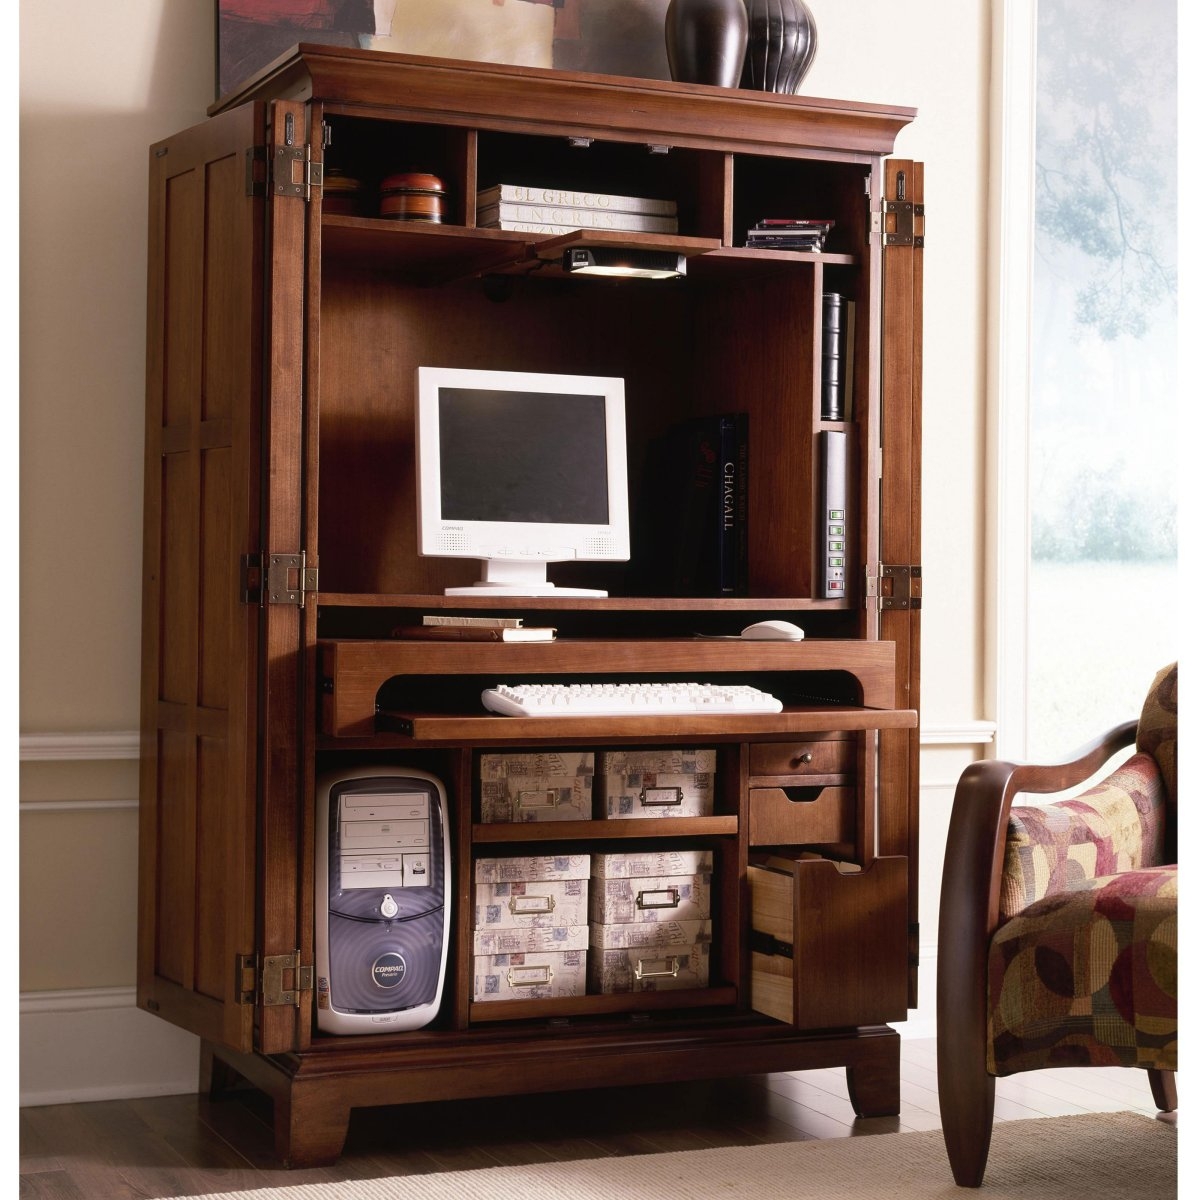 Riverside Furniture American Crossings Computer Armoire in Fawn Cherry